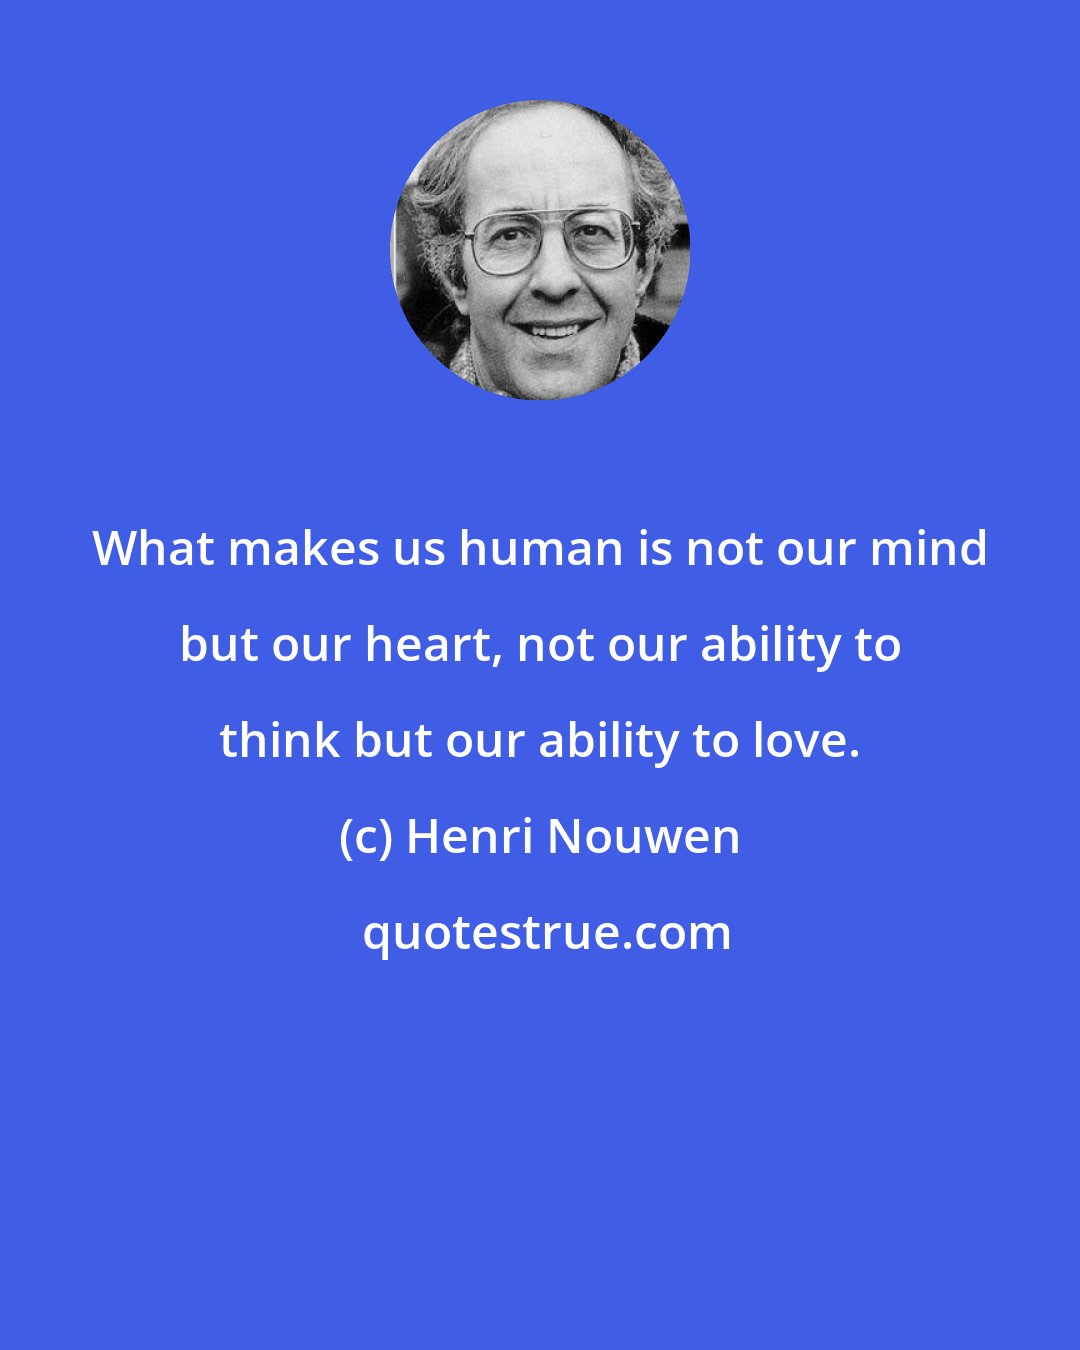 Henri Nouwen: What makes us human is not our mind but our heart, not our ability to think but our ability to love.